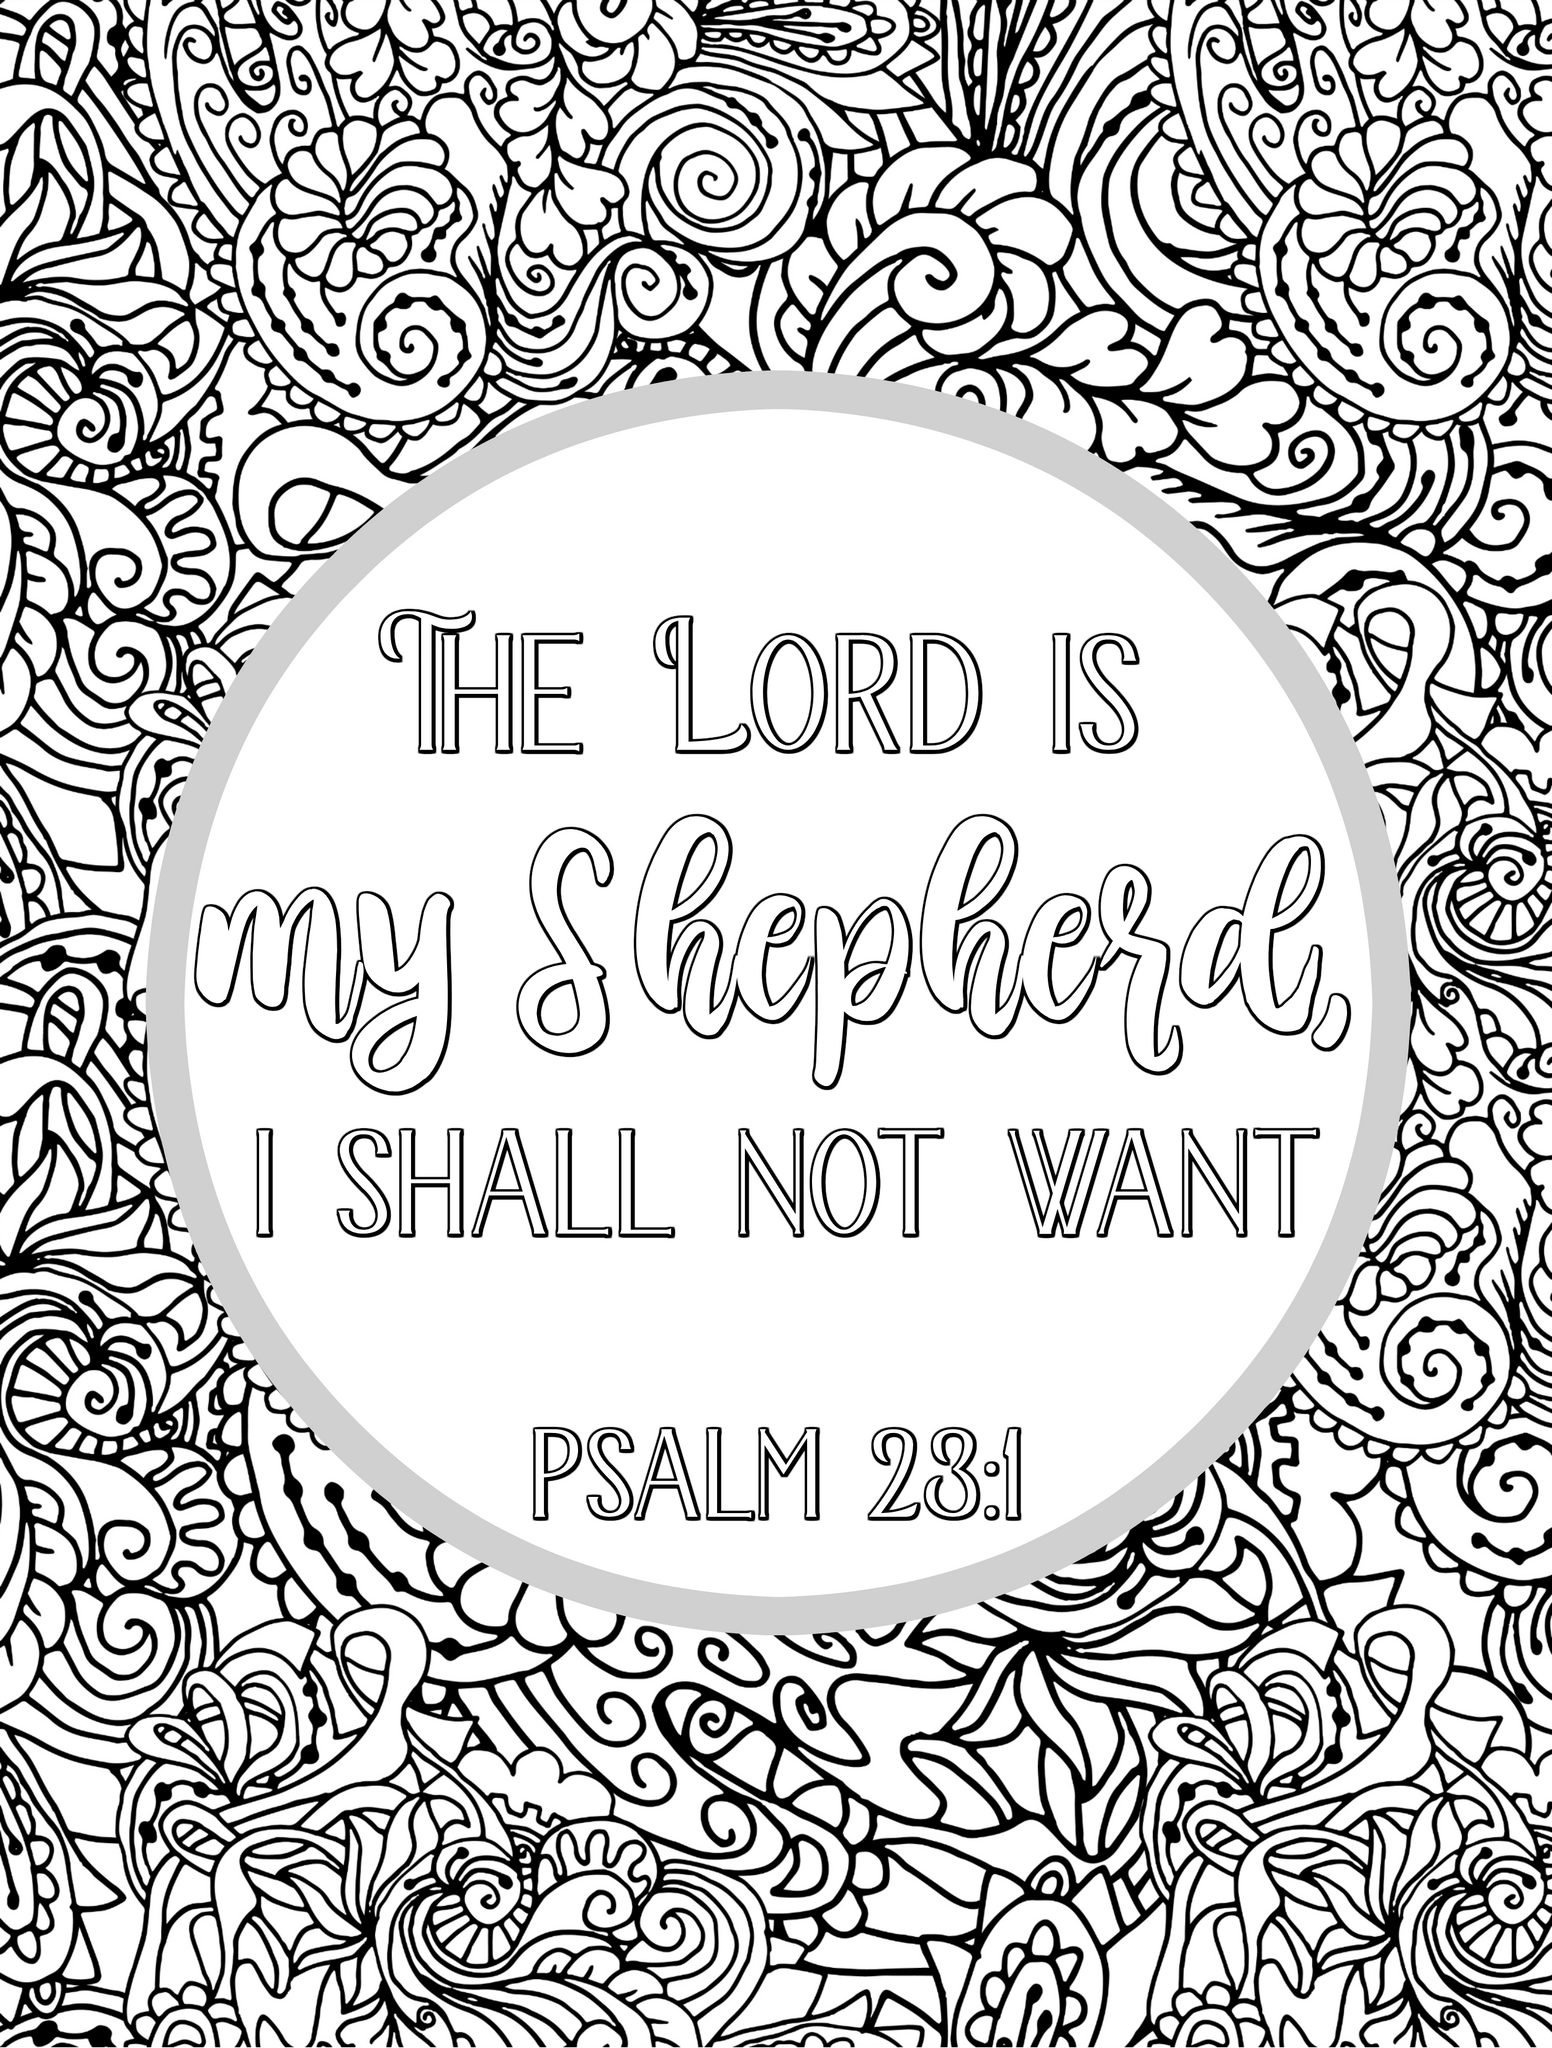 The lord is my shepherd scripture coloring page â a divine encounter